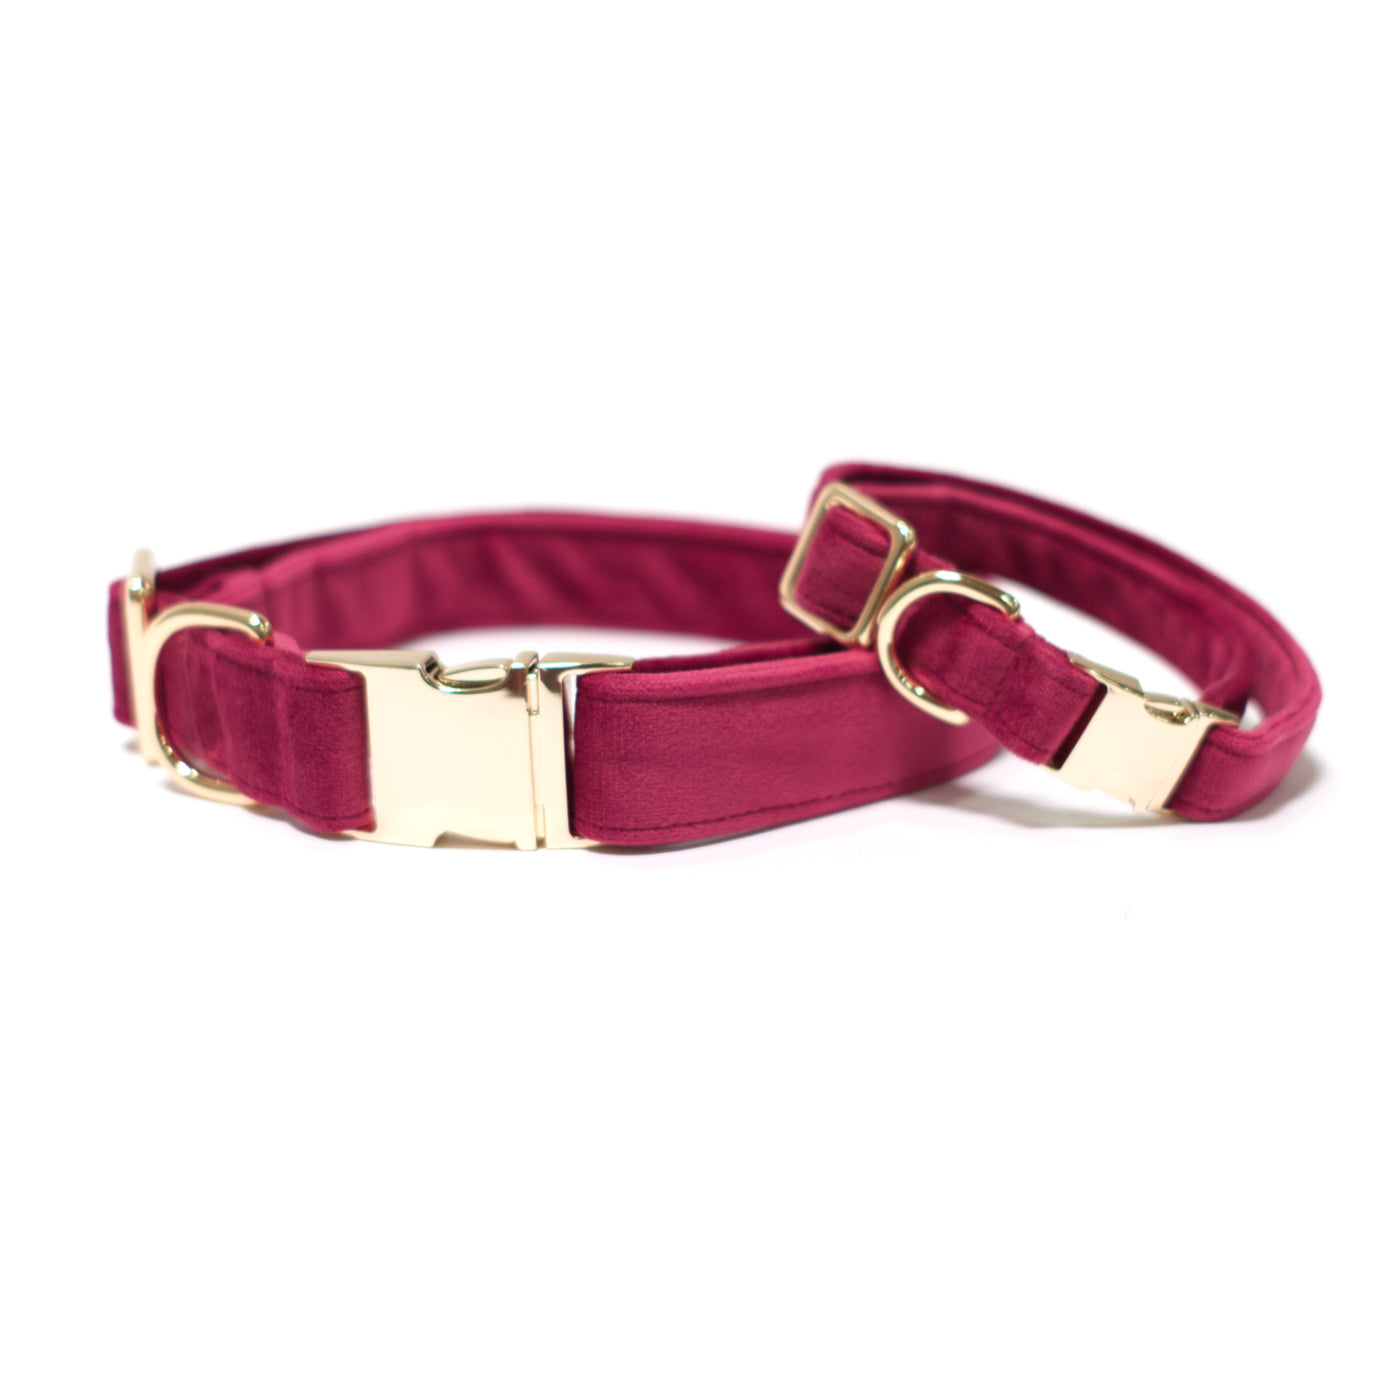 Wine velvet dog collars with gold hardware in sizes medium and small